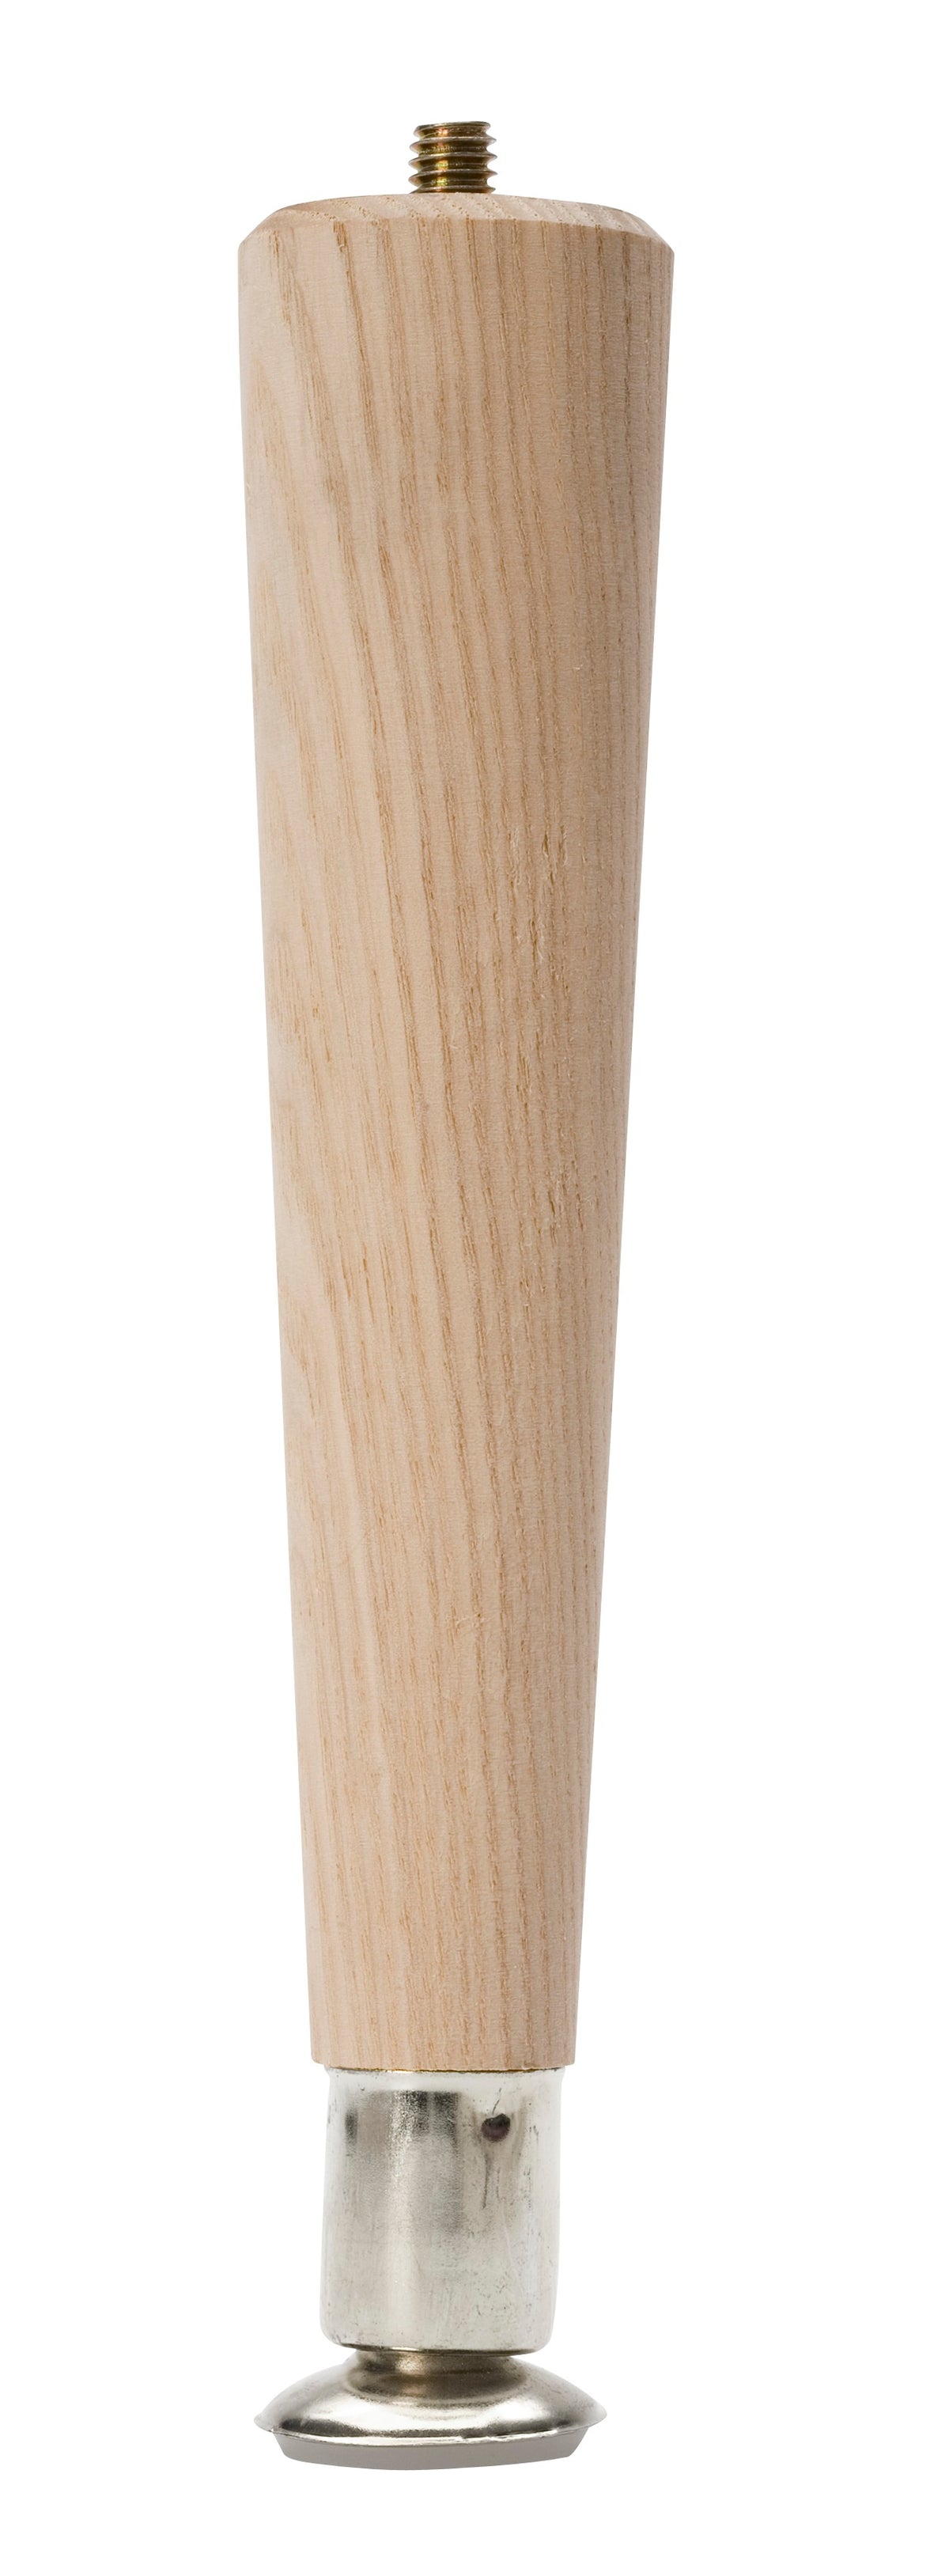 buy wood & table legs at cheap rate in bulk. wholesale & retail home hardware products store. home décor ideas, maintenance, repair replacement parts